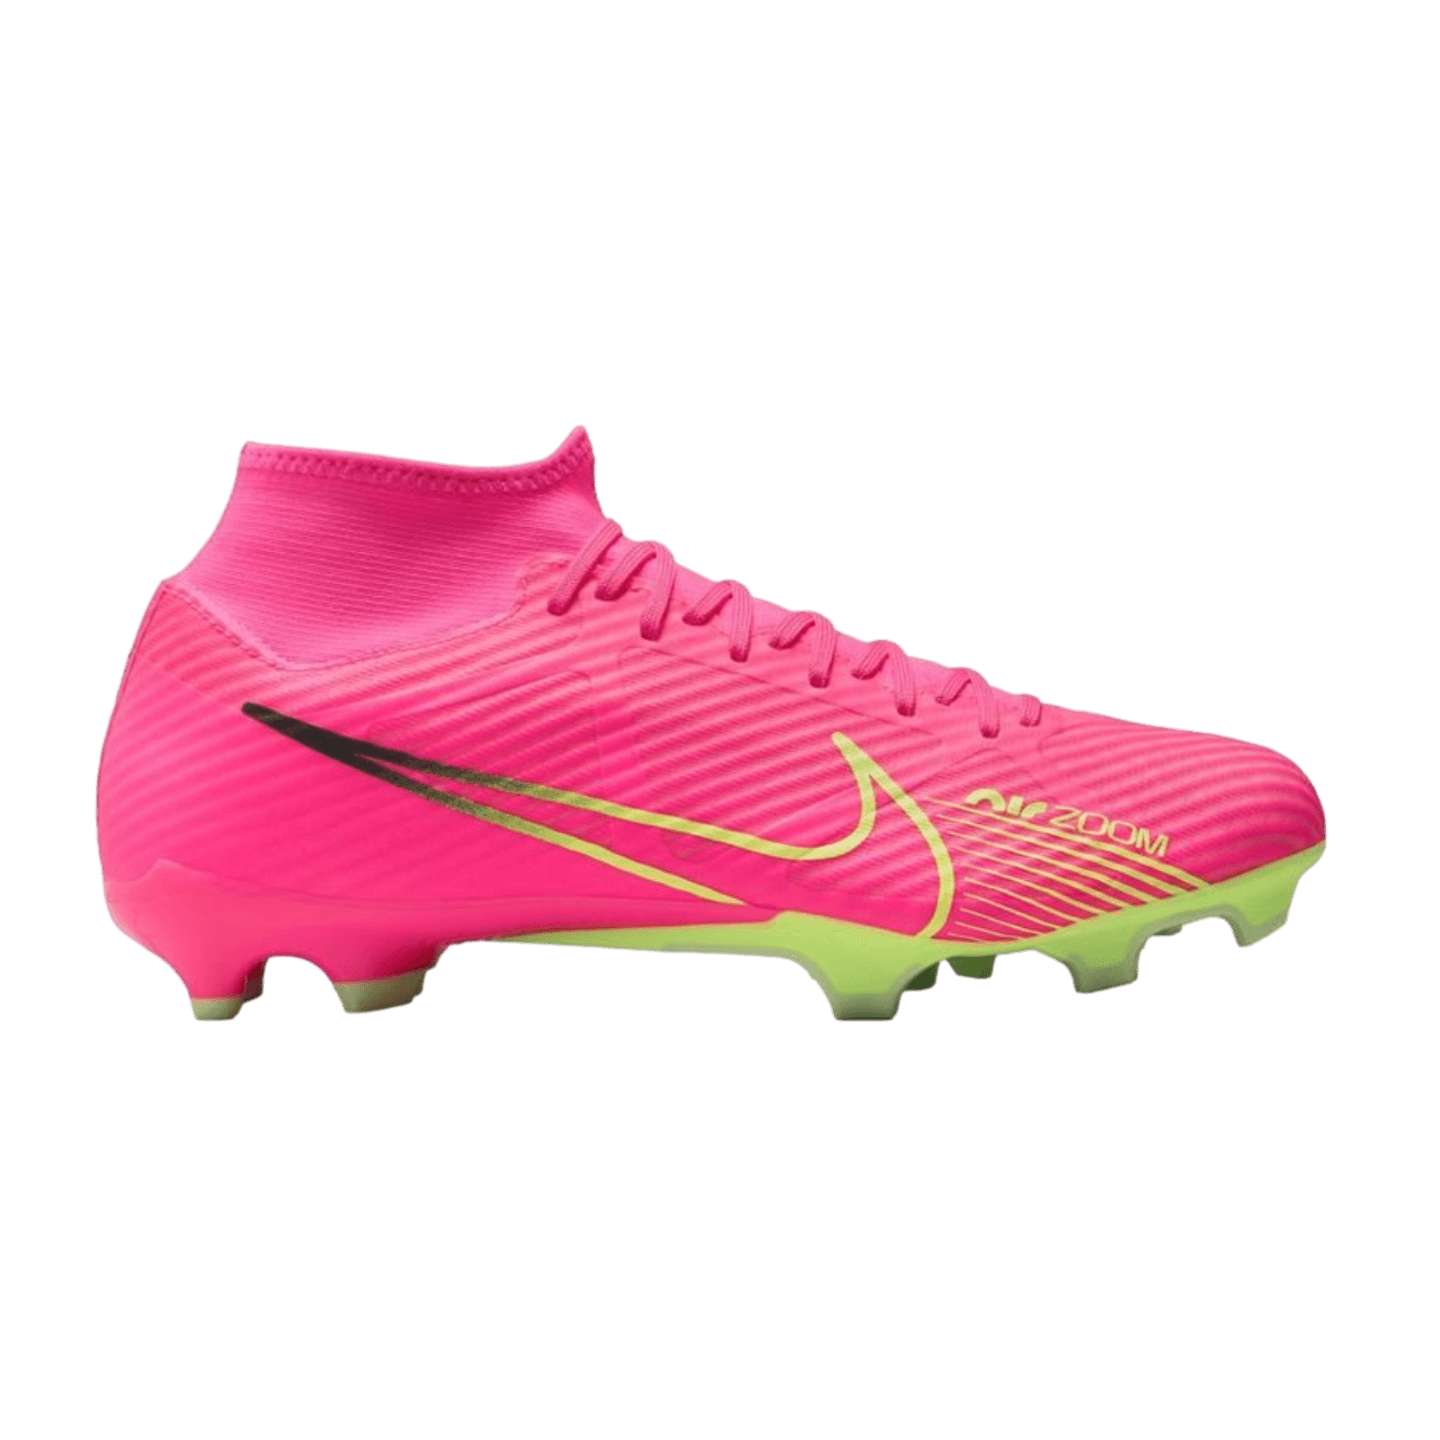 Nike Zoom Mercurial Superfly Academy Firm Ground Cleats